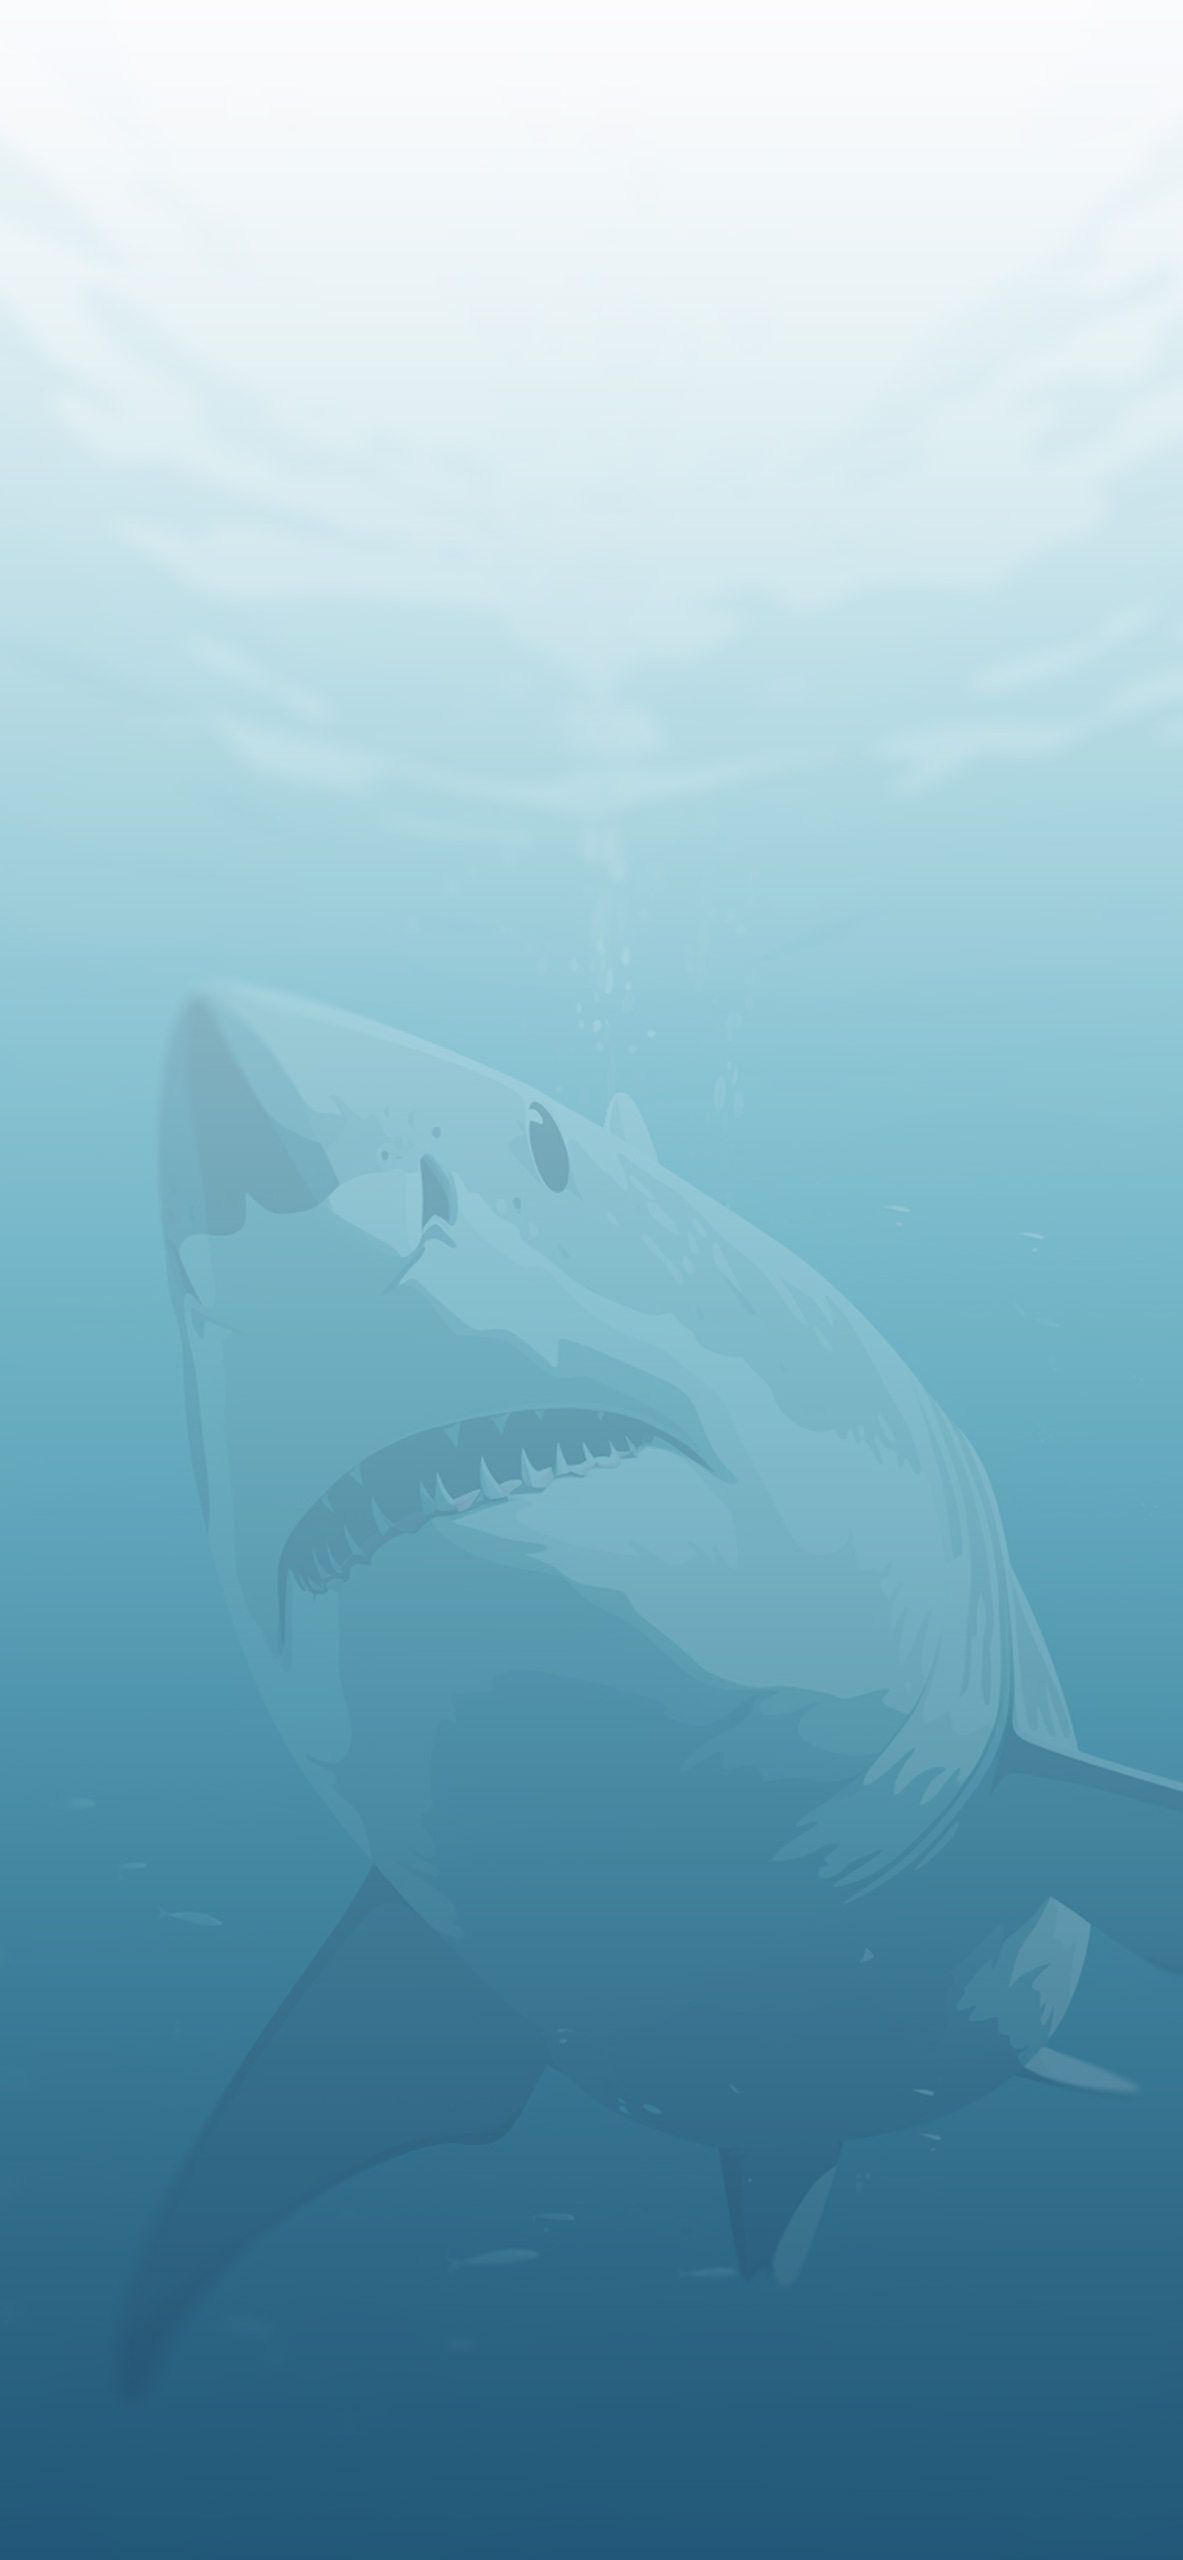 Download Shark wallpapers for mobile phone free Shark HD pictures